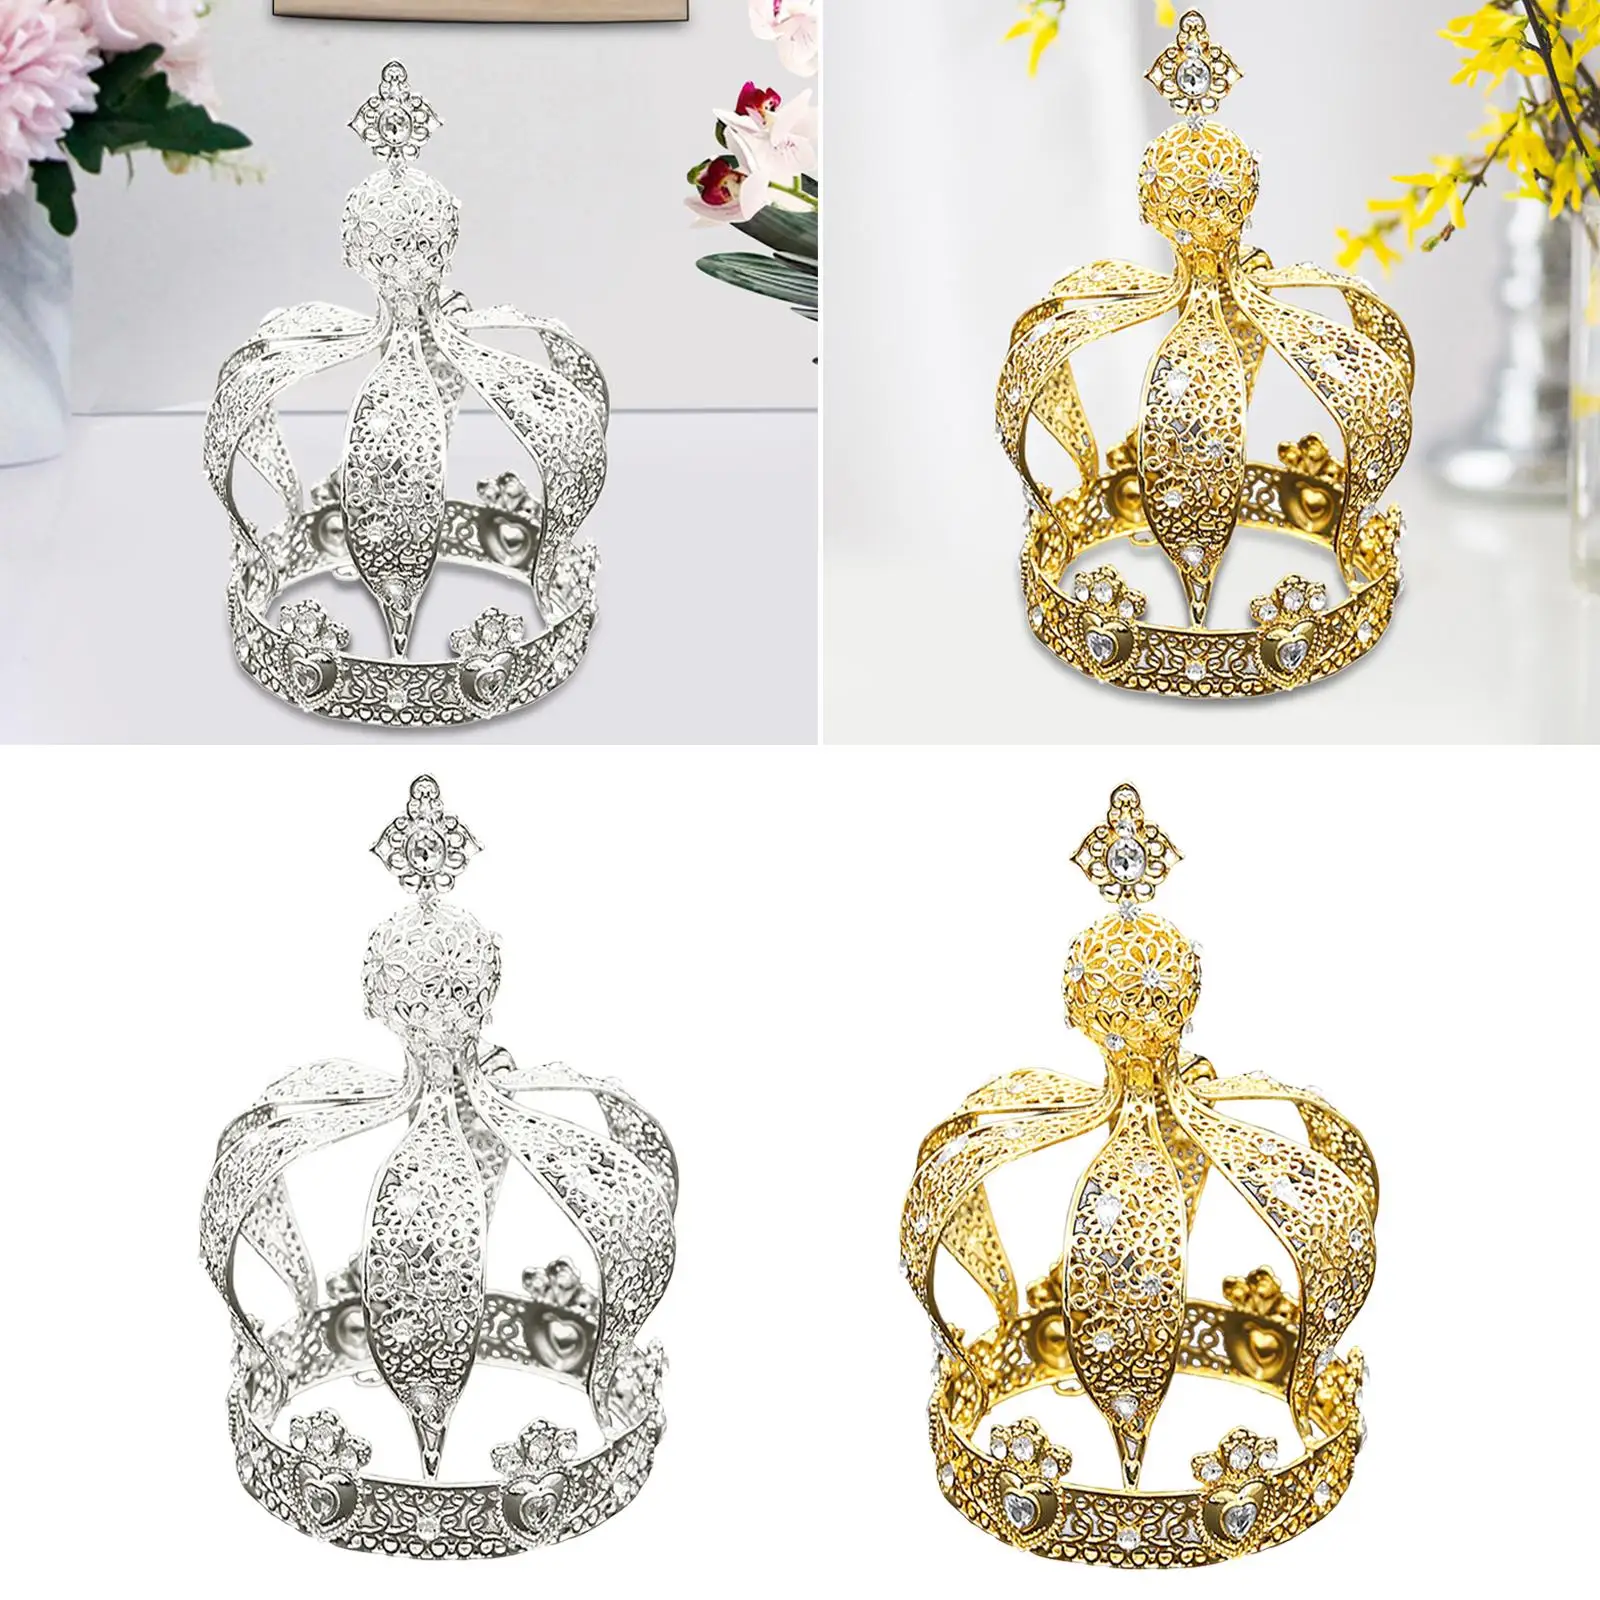 Crown Cake Topper Cupcake Decorations Alloy Cake Ornament Princess Crown for Birthday Party Anniversary Cosplay Themed Parties